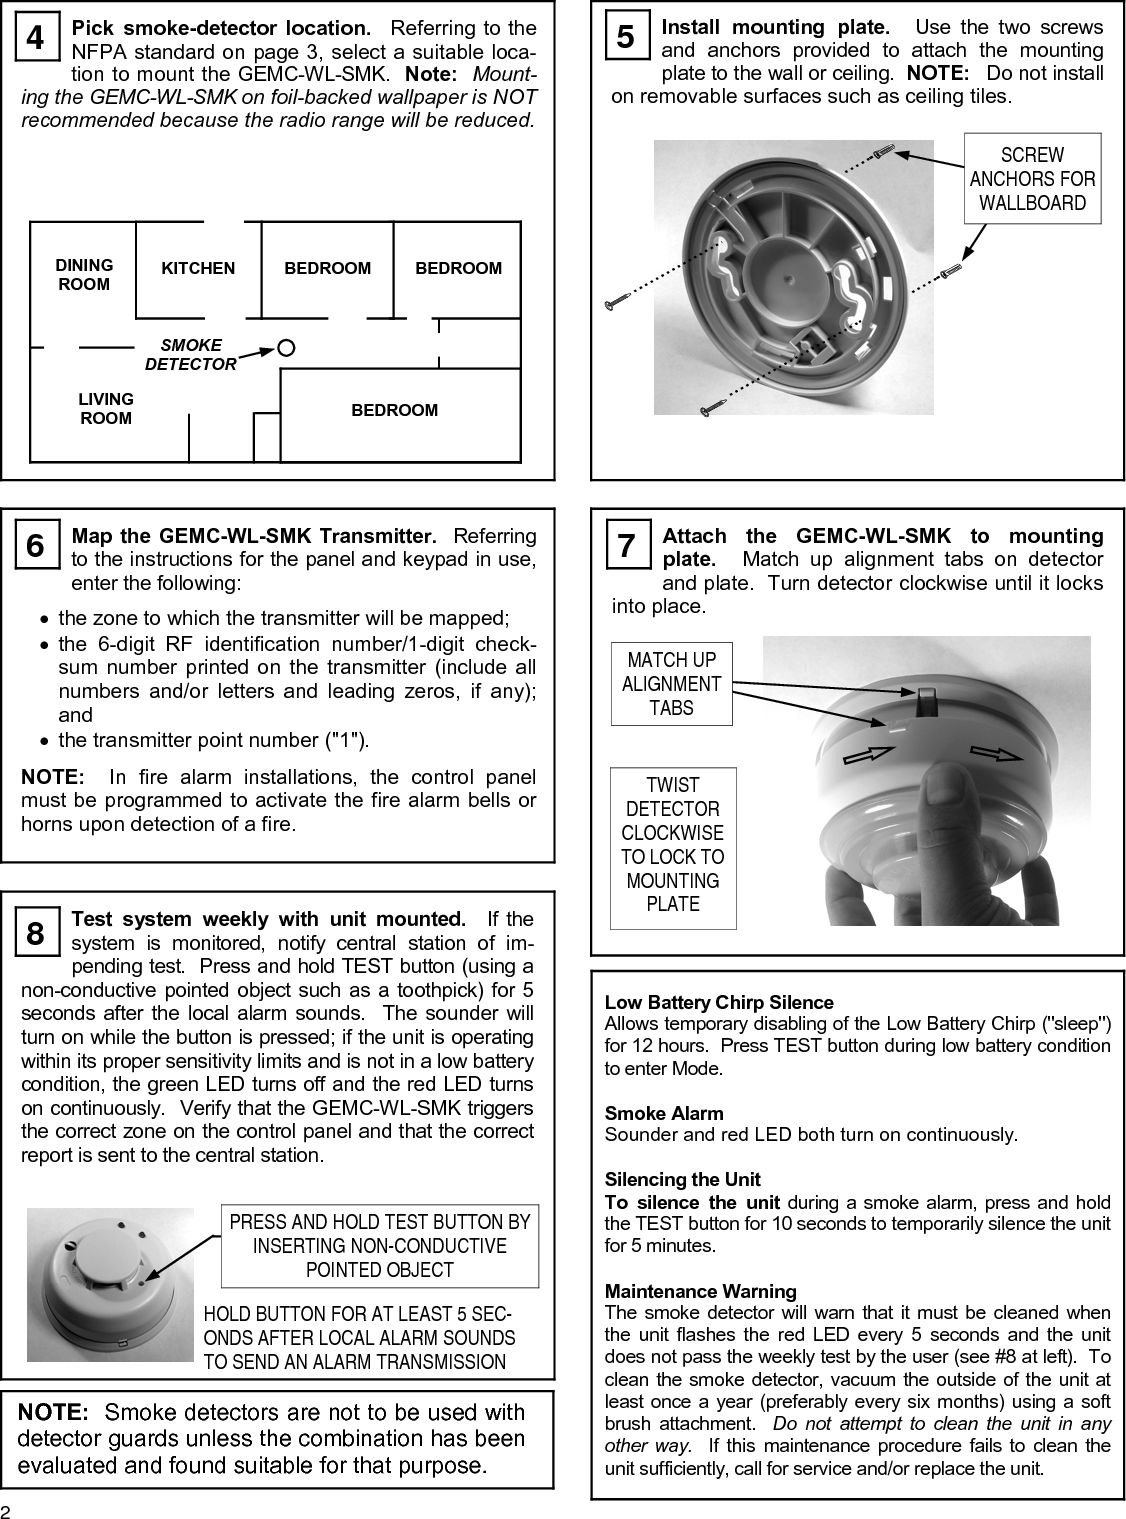 2 NOTE:  Smoke detectors are not to be used with detector guards unless the combination has been evaluated and found suitable for that purpose. Pick smoke-detector location.  Referring to the NFPA standard on page 3, select a suitable loca-tion to mount the GEMC-WL-SMK.  Note:  Mount-ing the GEMC-WL-SMK on foil-backed wallpaper is NOT recommended because the radio range will be reduced. Install mounting plate.  Use the two screws and anchors provided to attach the mounting plate to the wall or ceiling.  NOTE:  Do not install on removable surfaces such as ceiling tiles. Map the GEMC-WL-SMK Transmitter.  Referring to the instructions for the panel and keypad in use, enter the following:  •the zone to which the transmitter will be mapped; •the 6-digit RF identification number/1-digit check-sum number printed on the transmitter (include all numbers and/or letters and leading zeros, if any); and •the transmitter point number (&quot;1&quot;).  NOTE:  In fire alarm installations, the control panel must be programmed to activate the fire alarm bells or horns upon detection of a fire. Low Battery Chirp Silence Allows temporary disabling of the Low Battery Chirp (&quot;sleep&quot;) for 12 hours.  Press TEST button during low battery condition to enter Mode.  Smoke Alarm Sounder and red LED both turn on continuously.  Silencing the Unit To silence the unit during a smoke alarm, press and hold the TEST button for 10 seconds to temporarily silence the unit for 5 minutes.  Maintenance Warning The smoke detector will warn that it must be cleaned when the unit flashes the red LED every 5 seconds and the unit does not pass the weekly test by the user (see #8 at left).  To clean the smoke detector, vacuum the outside of the unit at least once a year (preferably every six months) using a soft brush attachment.  Do not attempt to clean the unit in any other way.  If this maintenance procedure fails to clean the unit sufficiently, call for service and/or replace the unit. Test system weekly with unit mounted.  If the system is monitored, notify central station of im-pending test.  Press and hold TEST button (using a non-conductive pointed object such as a toothpick) for 5 seconds after the local alarm sounds.  The sounder will turn on while the button is pressed; if the unit is operating within its proper sensitivity limits and is not in a low battery condition, the green LED turns off and the red LED turns on continuously.  Verify that the GEMC-WL-SMK triggers the correct zone on the control panel and that the correct report is sent to the central station. HOLD BUTTON FOR AT LEAST 5 SEC-ONDS AFTER LOCAL ALARM SOUNDS TO SEND AN ALARM TRANSMISSION Attach the GEMC-WL-SMK to mounting plate.  Match up alignment tabs on detector and plate.  Turn detector clockwise until it locks into place. TWIST  DETECTOR CLOCKWISE TO LOCK TO MOUNTING PLATE         DINING ROOM KITCHEN SMOKE DETECTOR BEDROOM  BEDROOM LIVING ROOM  BEDROOM  4   5  6   7  8  SCREW  ANCHORS FOR WALLBOARD  MATCH UP ALIGNMENT TABS PRESS AND HOLD TEST BUTTON BY INSERTING NON-CONDUCTIVE POINTED OBJECT 